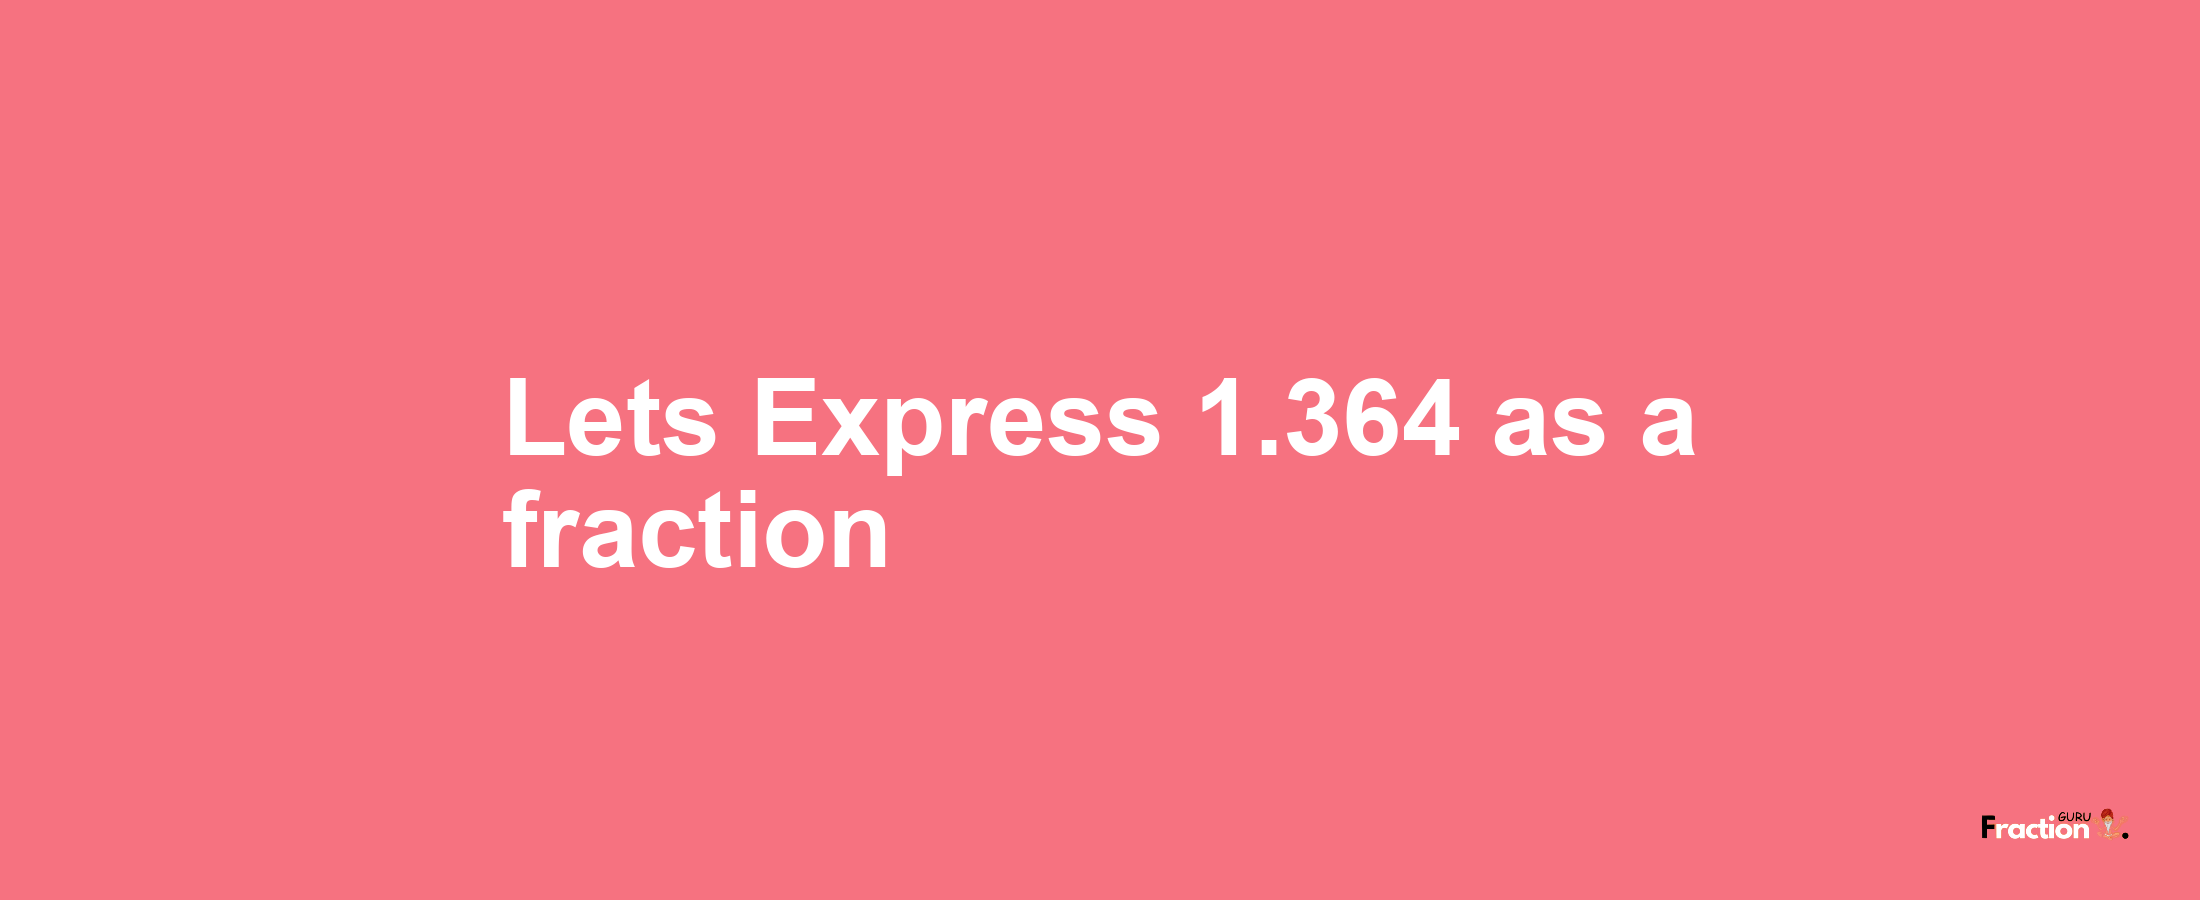 Lets Express 1.364 as afraction